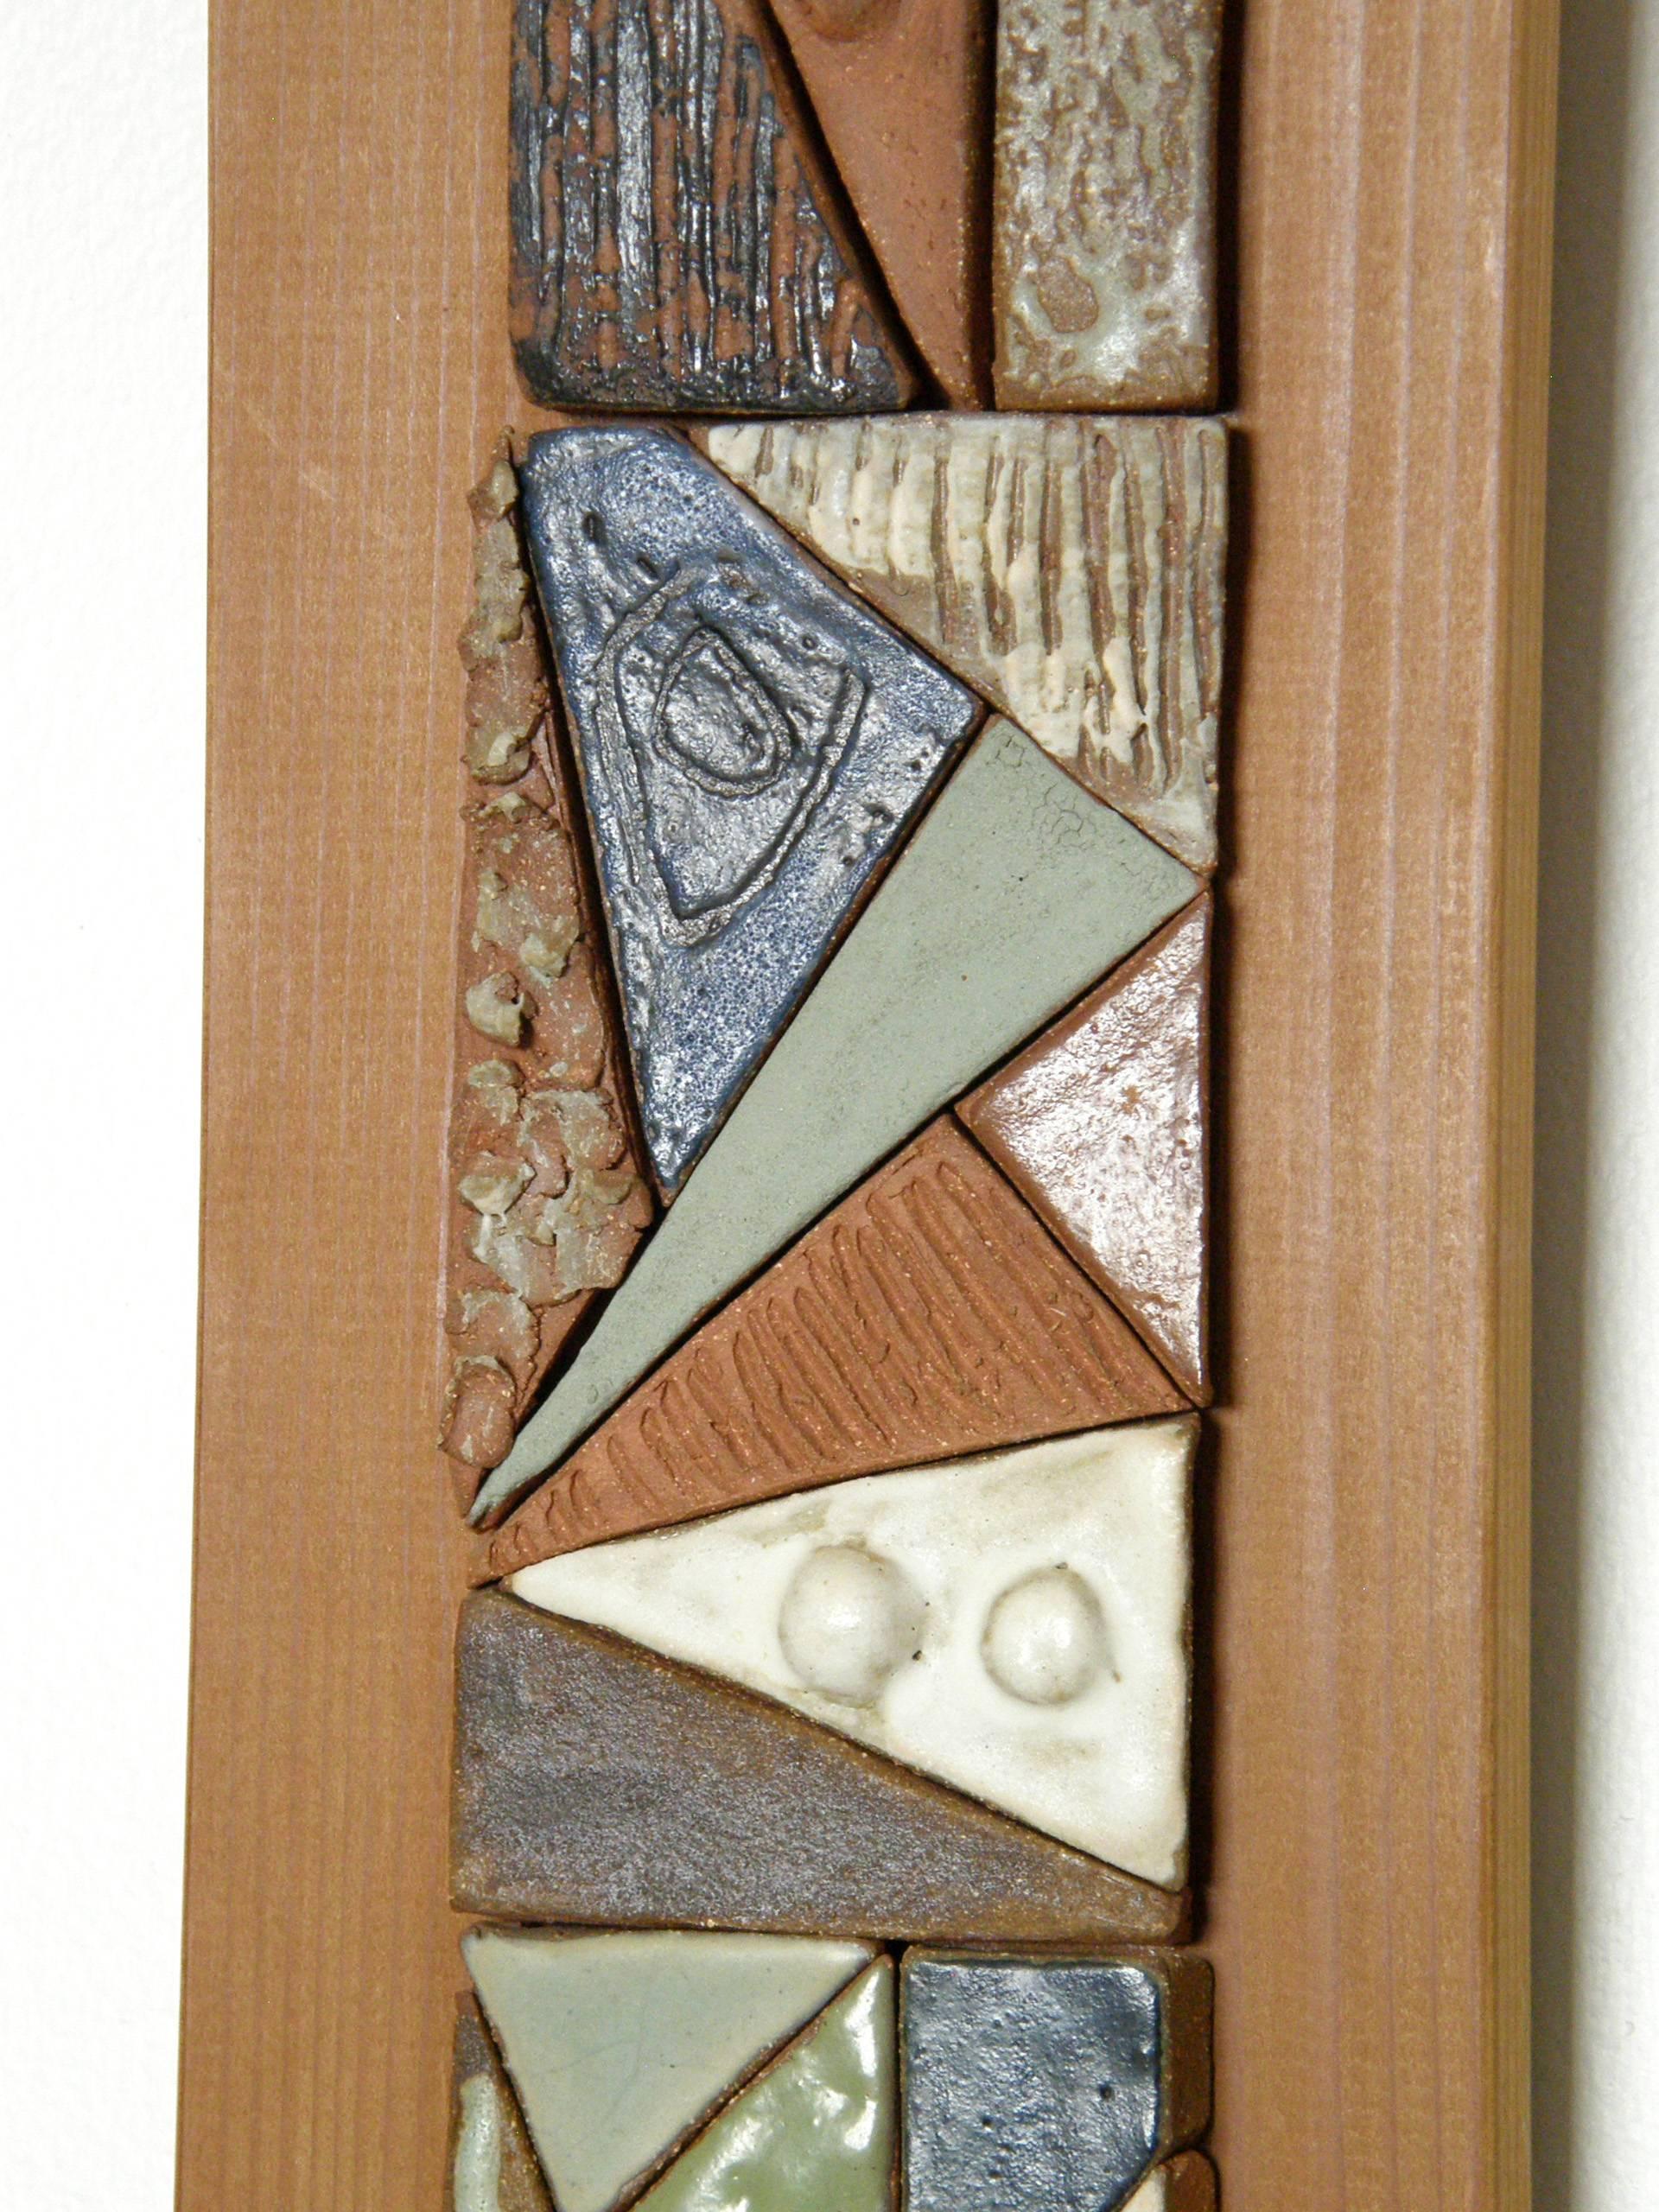 American Abstract Ceramic Mosaic on Wood Relief Wall Sculpture by Peg Tootelian